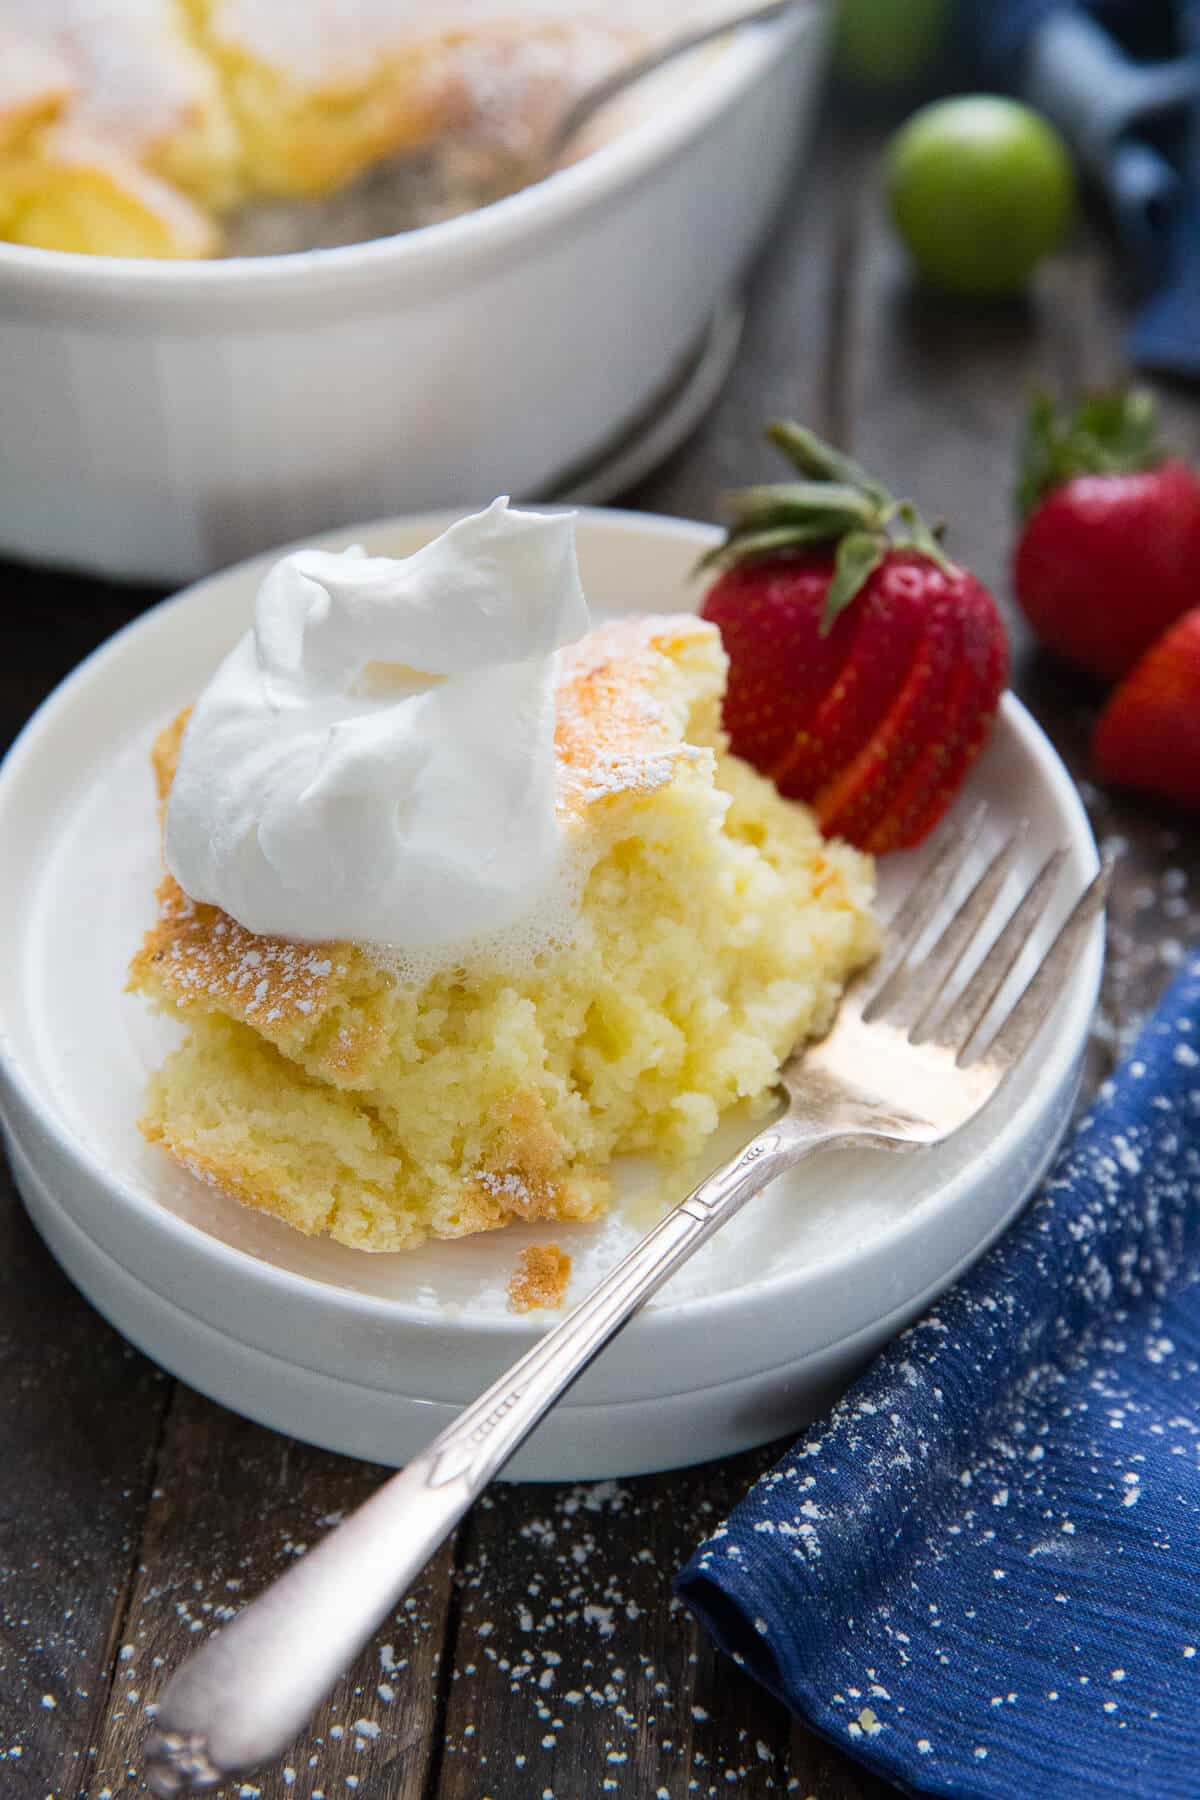 This pudding cake has a light fluffy cake layer that bakes up over a silky pudding layer. It is magical!